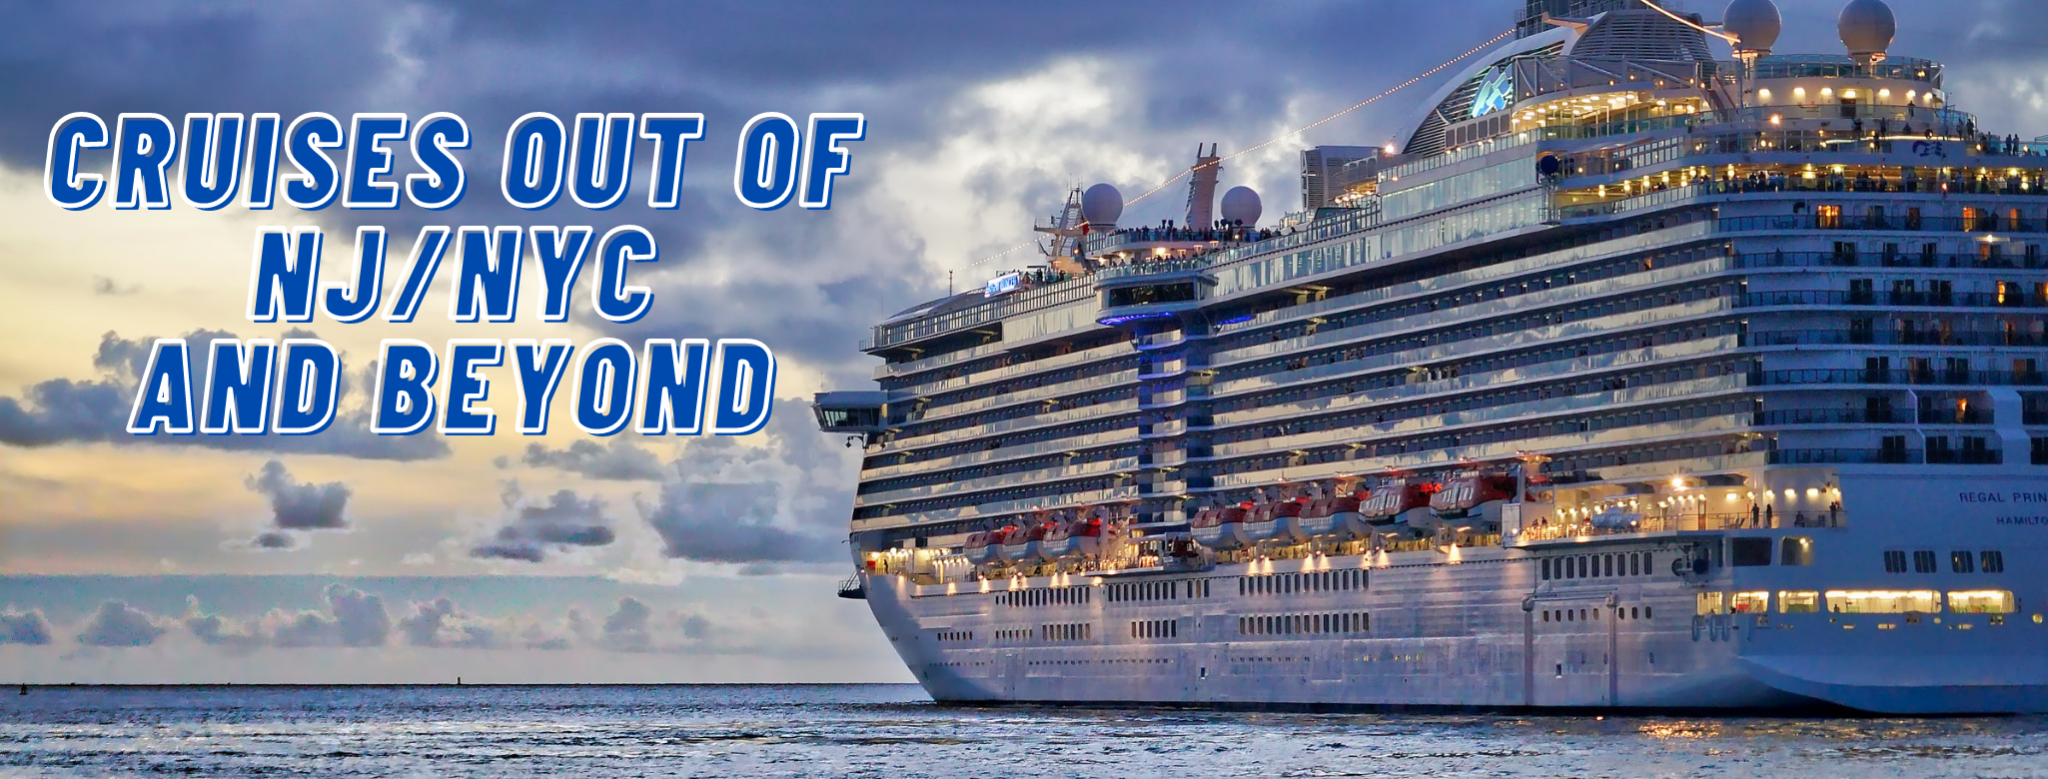 Cruises out of NJ/NYC and Beyond! General cruise info with emphasis in the NJ/NYC area.